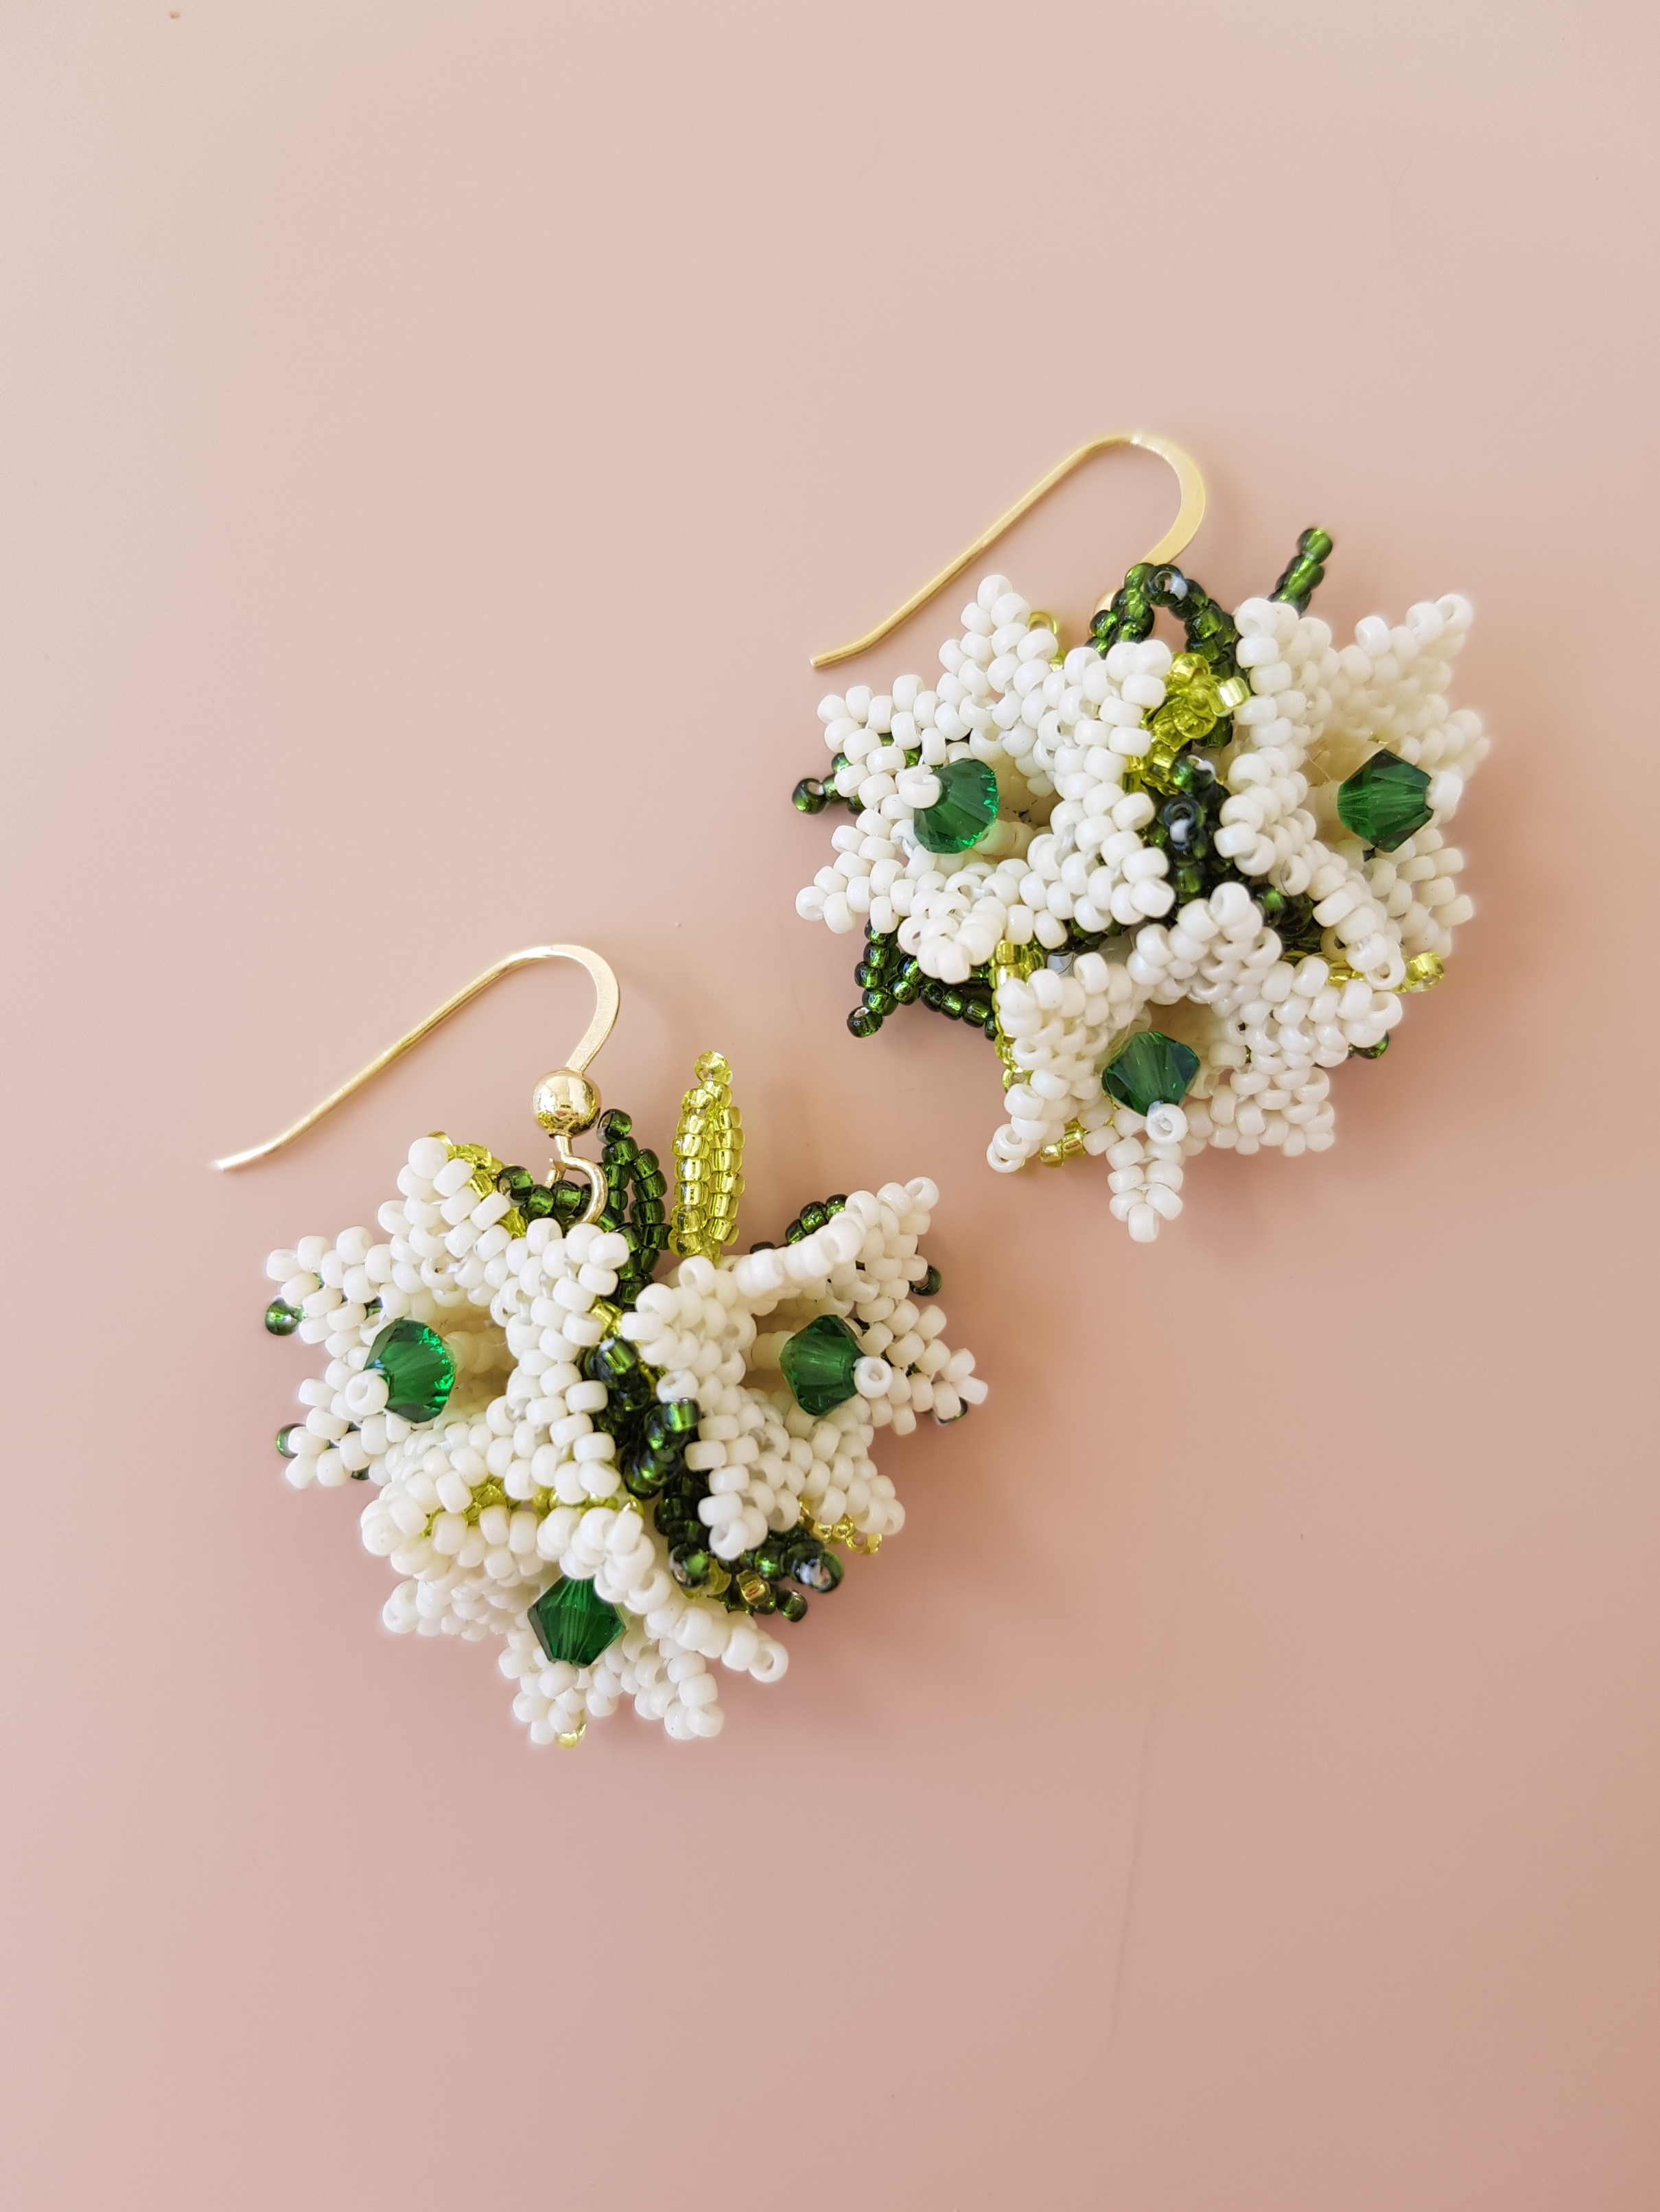 Morning - Special ceremony earrings